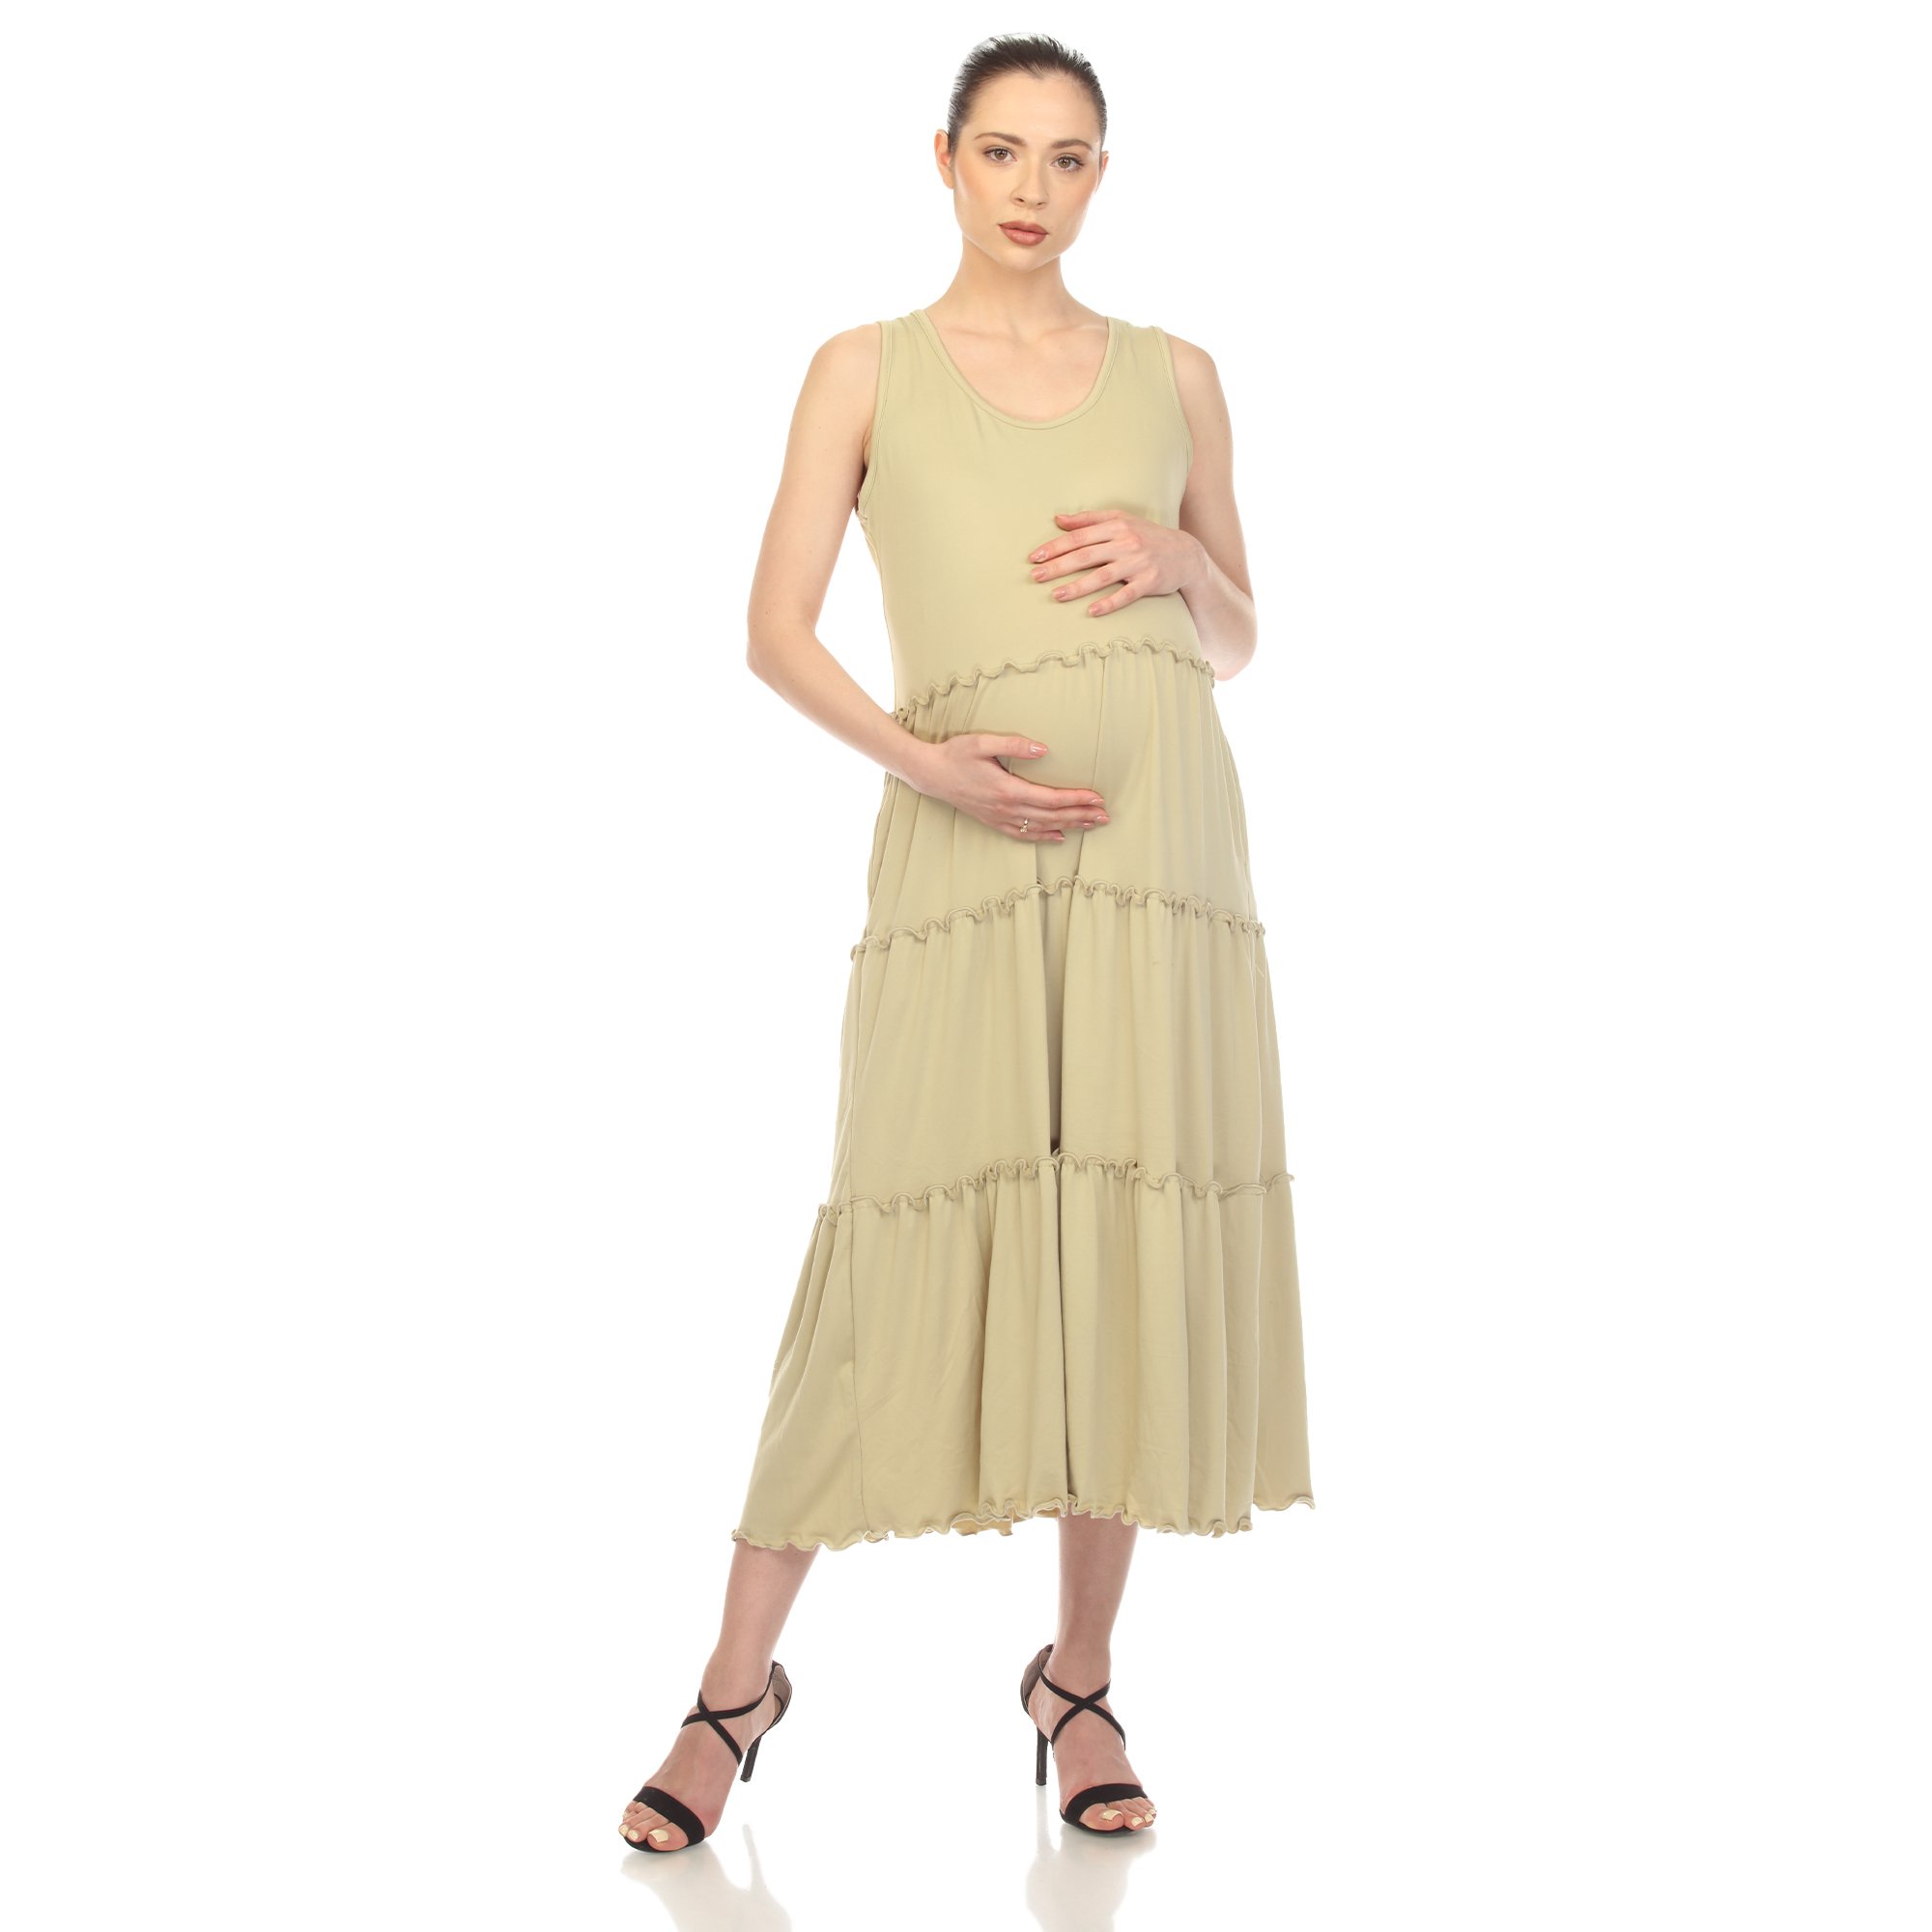 White Mark Women's Maternity Scoop Neck Tiered Midi Dress - Pale Olive, Large